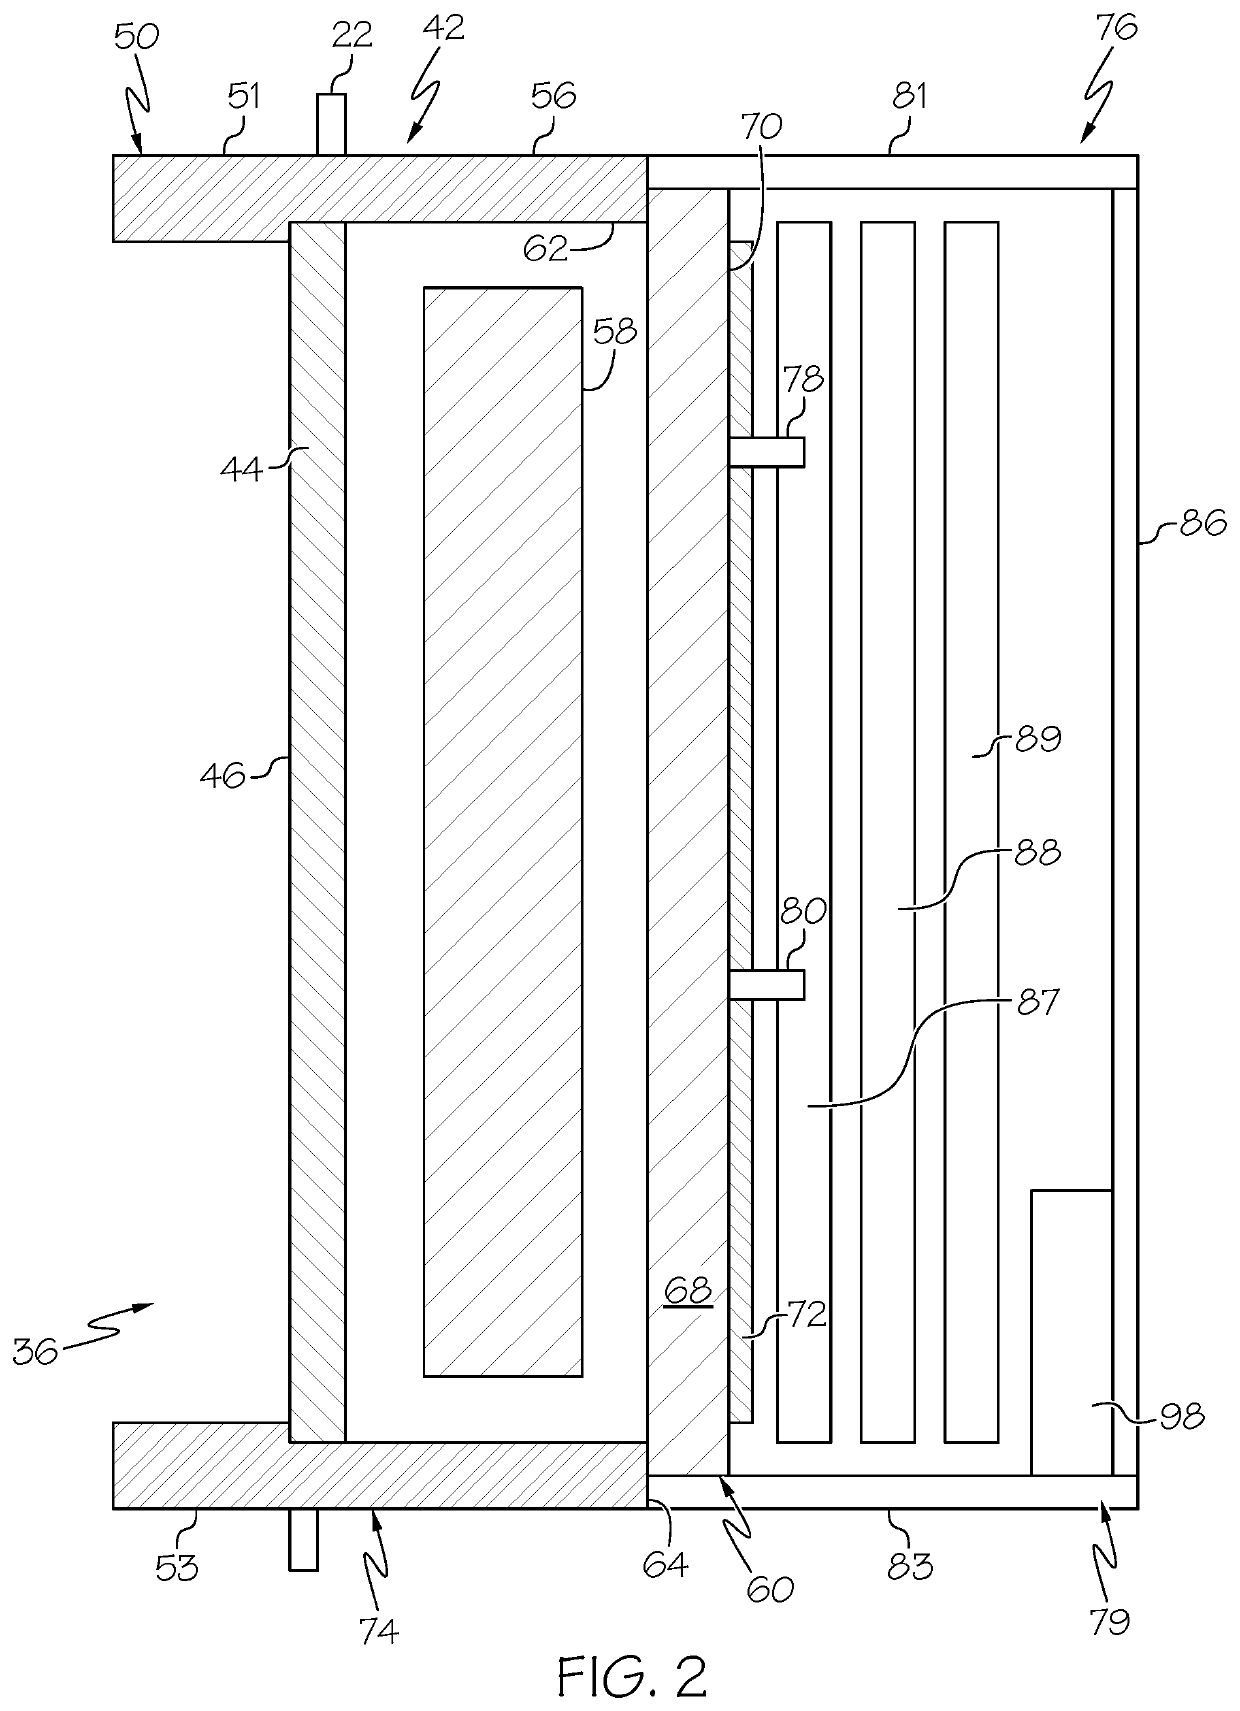 Flammability resistant visual display assembly